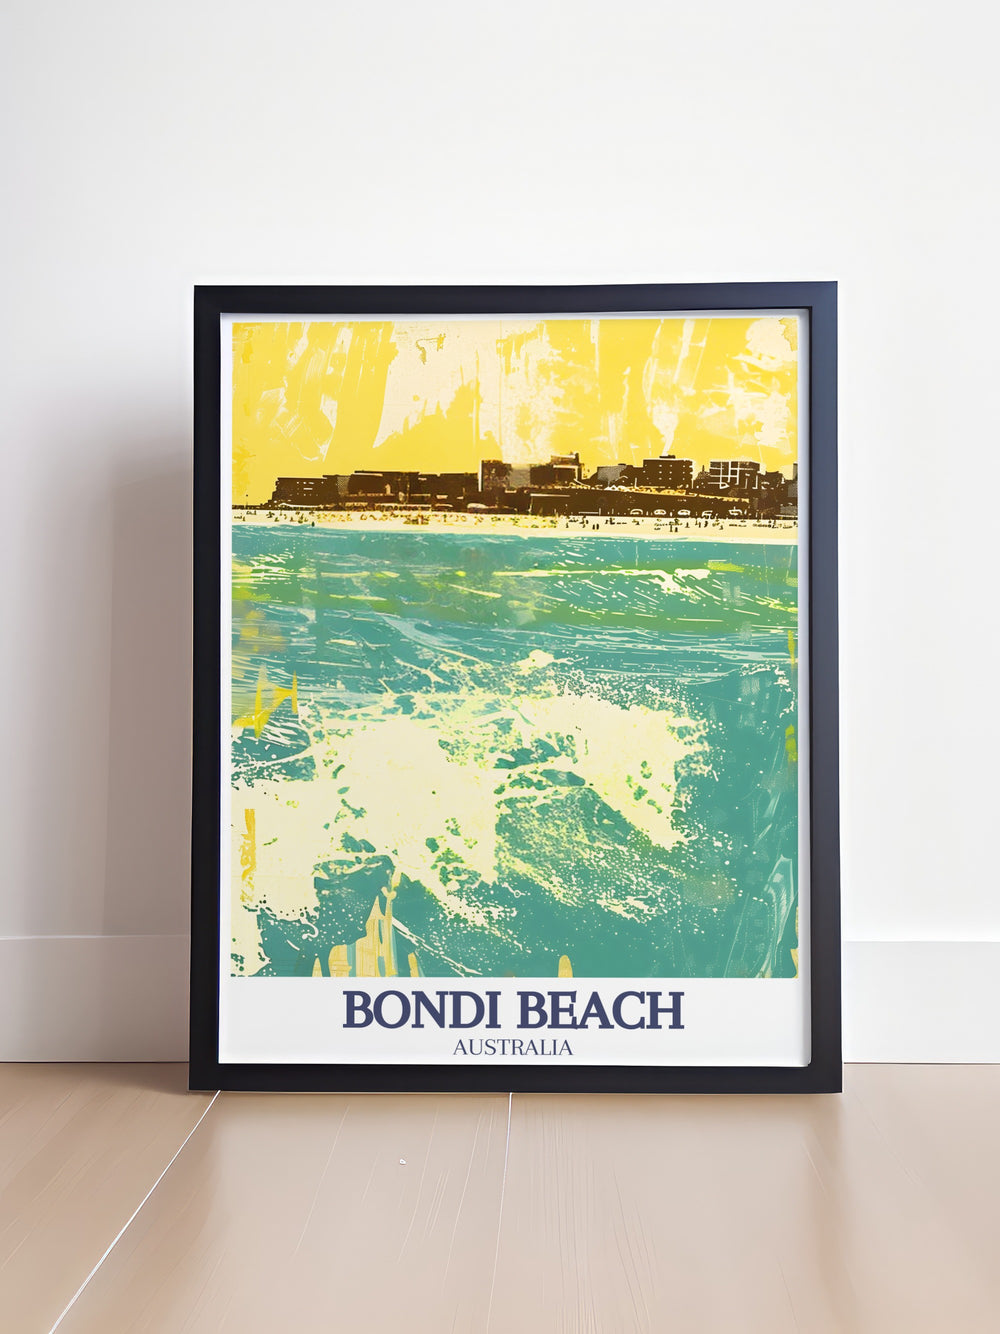 Retro travel poster of Sydney Harbour with detailed illustrations of the Sydney Opera House and Harbour Bridge. Bondi, South Bondi Beach wall art brings coastal charm and energy to your living space, ideal for travel enthusiasts and art lovers.